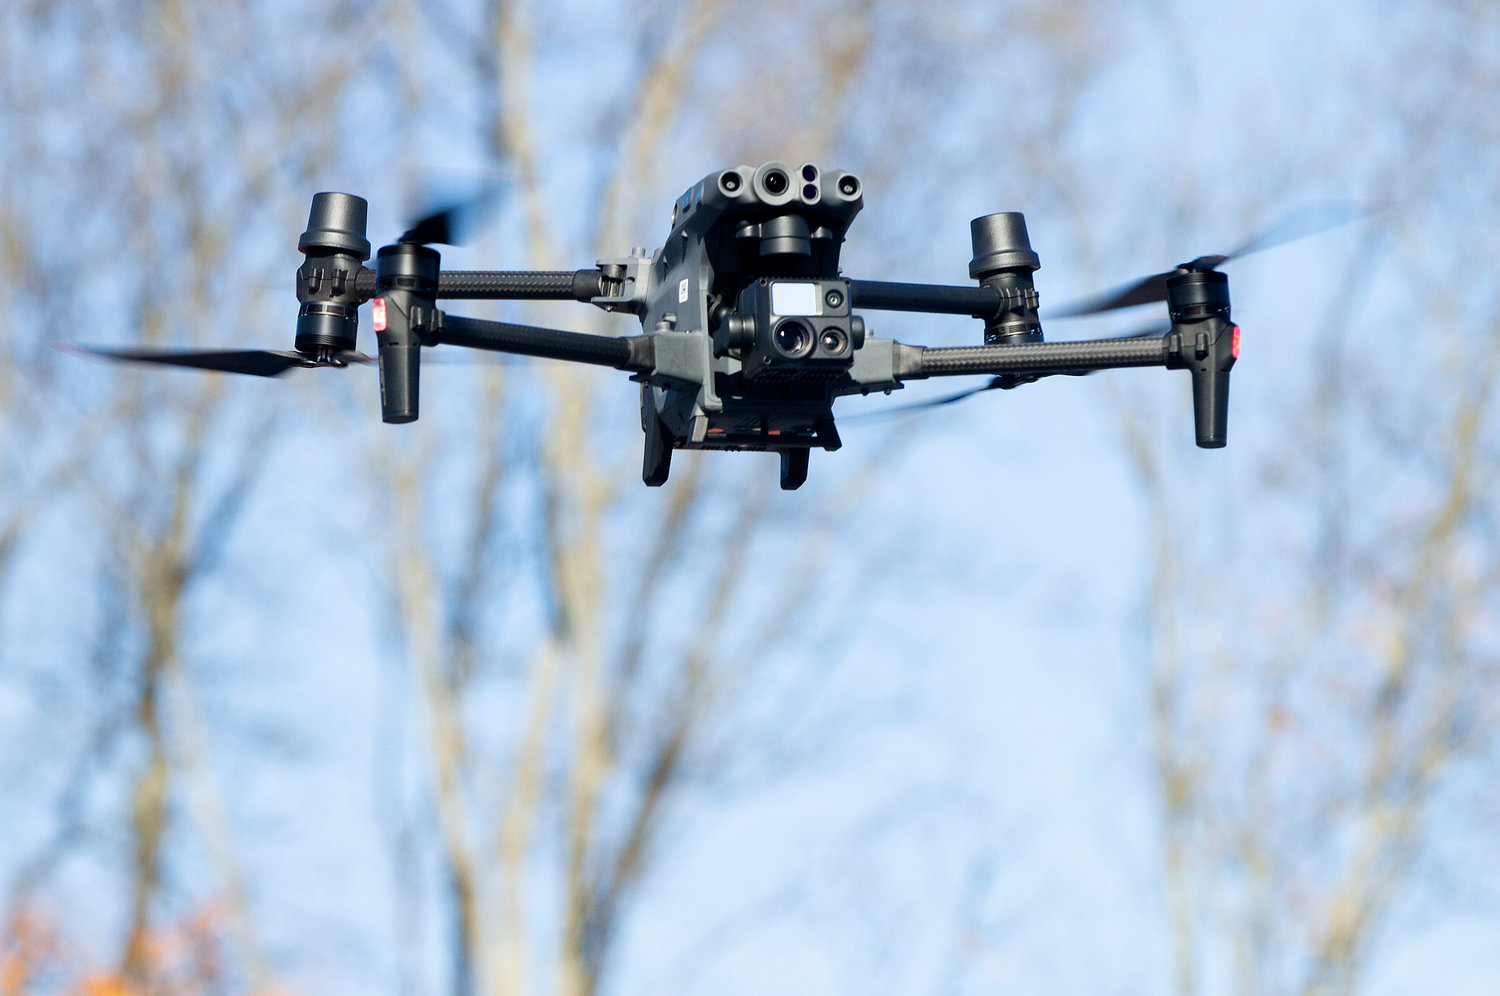 The DJI Matrice 30 drone cost $14,000, which came from funds gathered by drug interdictions. Its high-definition camera will assist police in assessing various situations that might otherwise be dangerous or impossible for them to observe with officers.